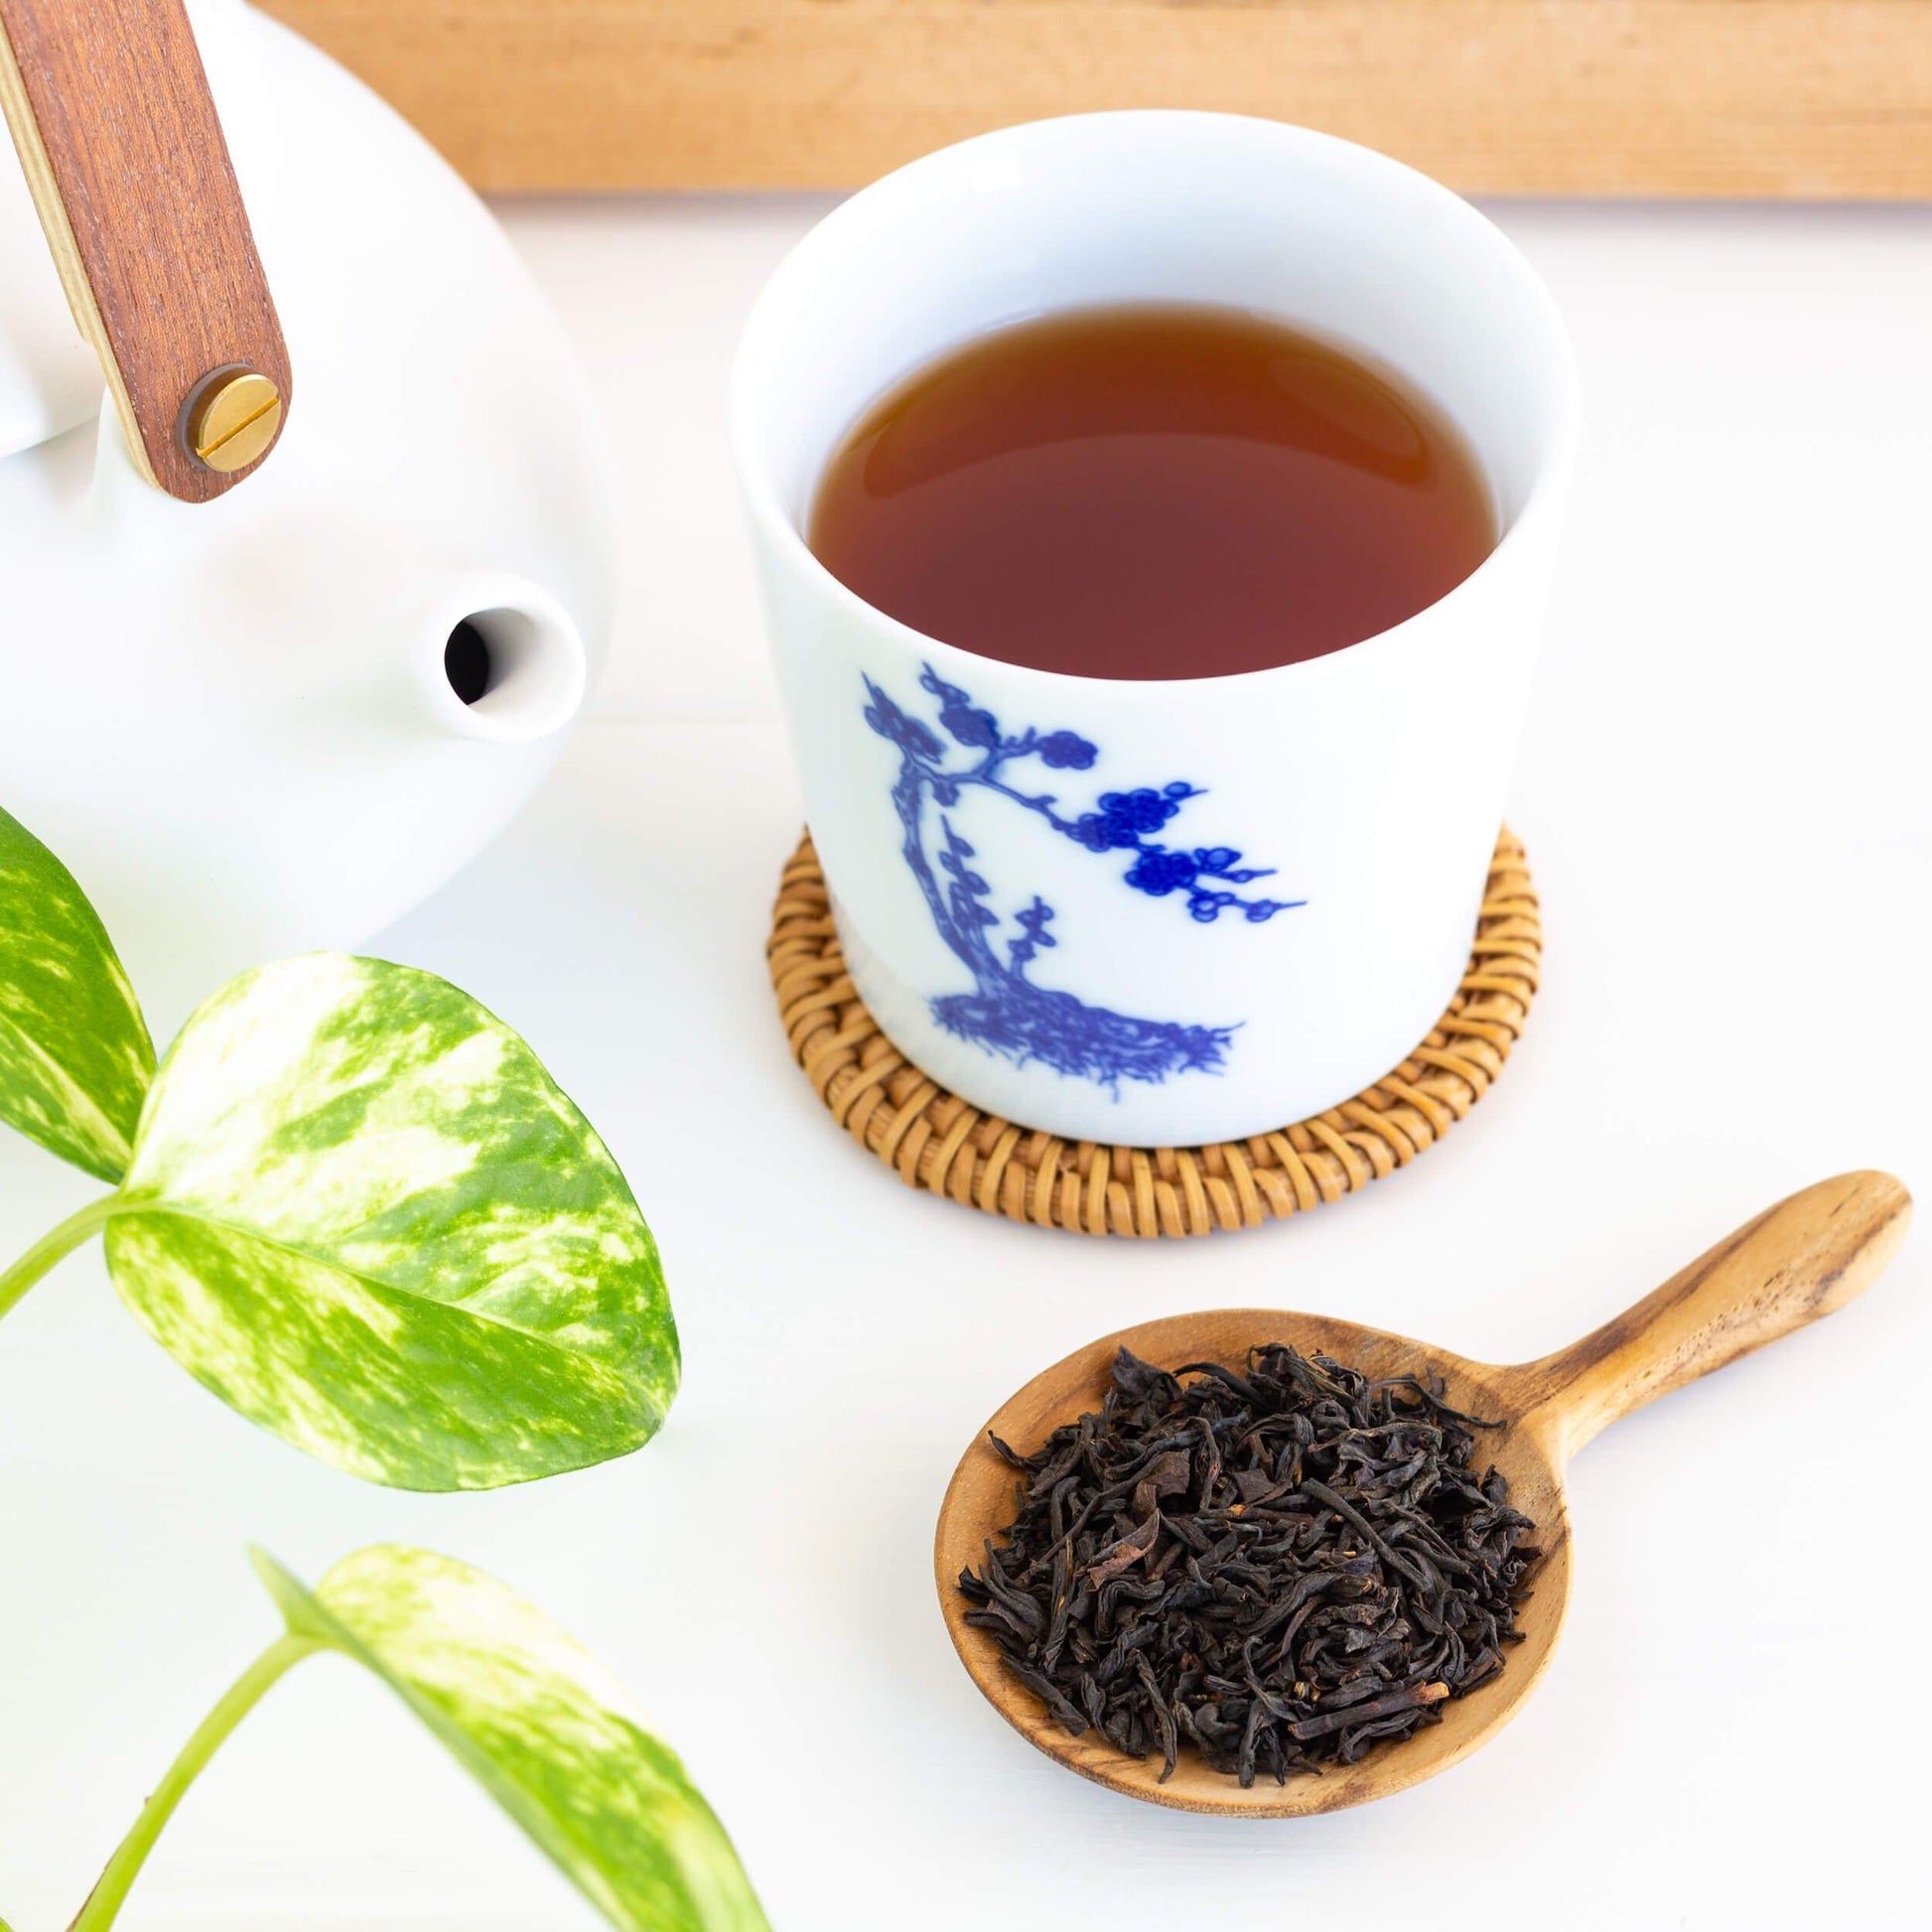 Lapsang Souchong Organic Black Tea shown as brewed tea in a white cup with a blue bonsai tree design on it. A white teapot and green plant are nearby. A wooden scoop of loose tea leaves is in the foreground